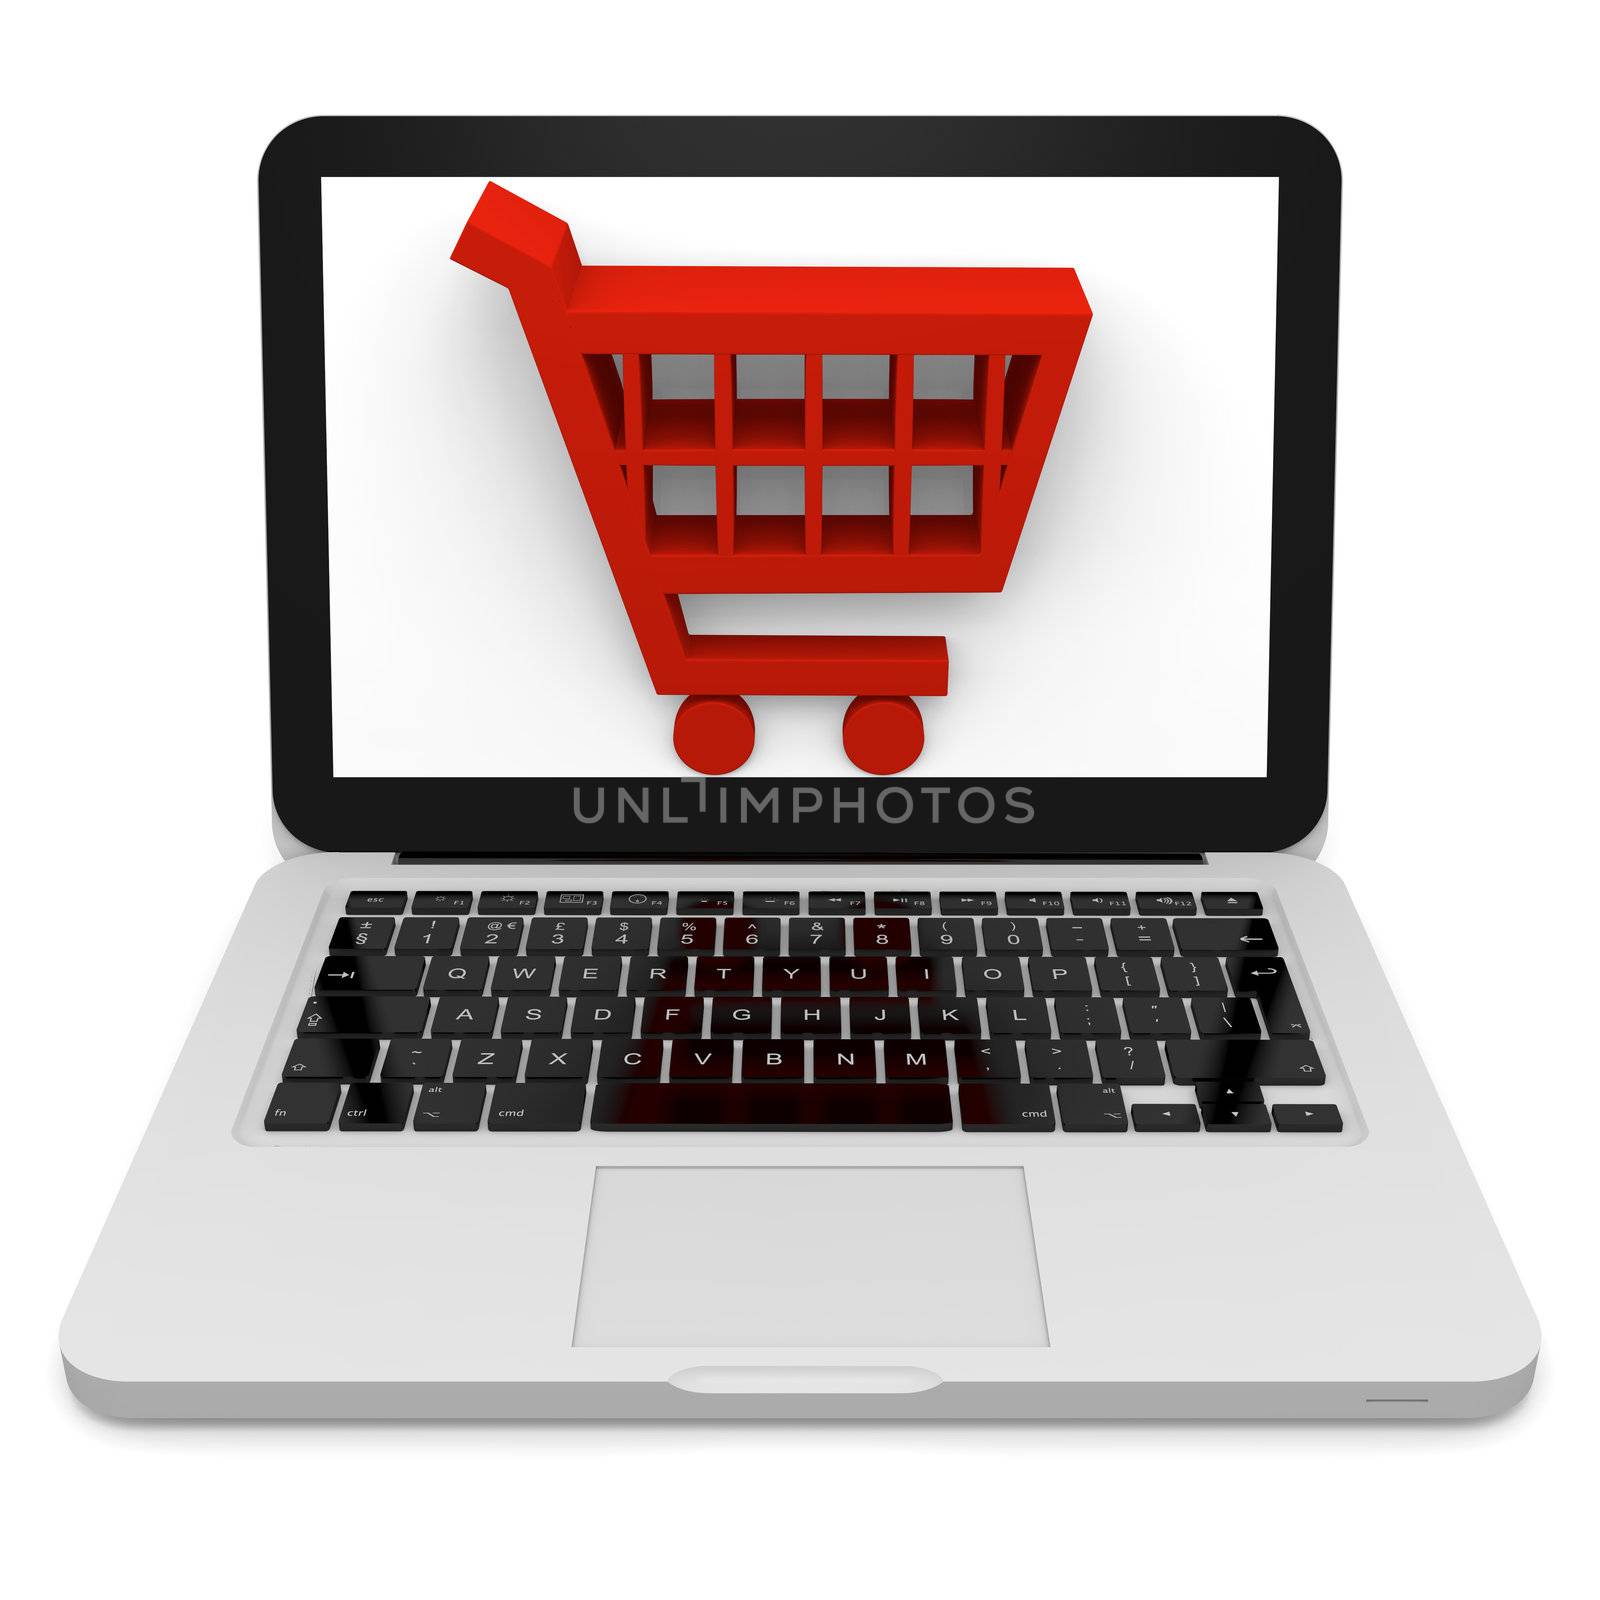 Online shopping by Harvepino